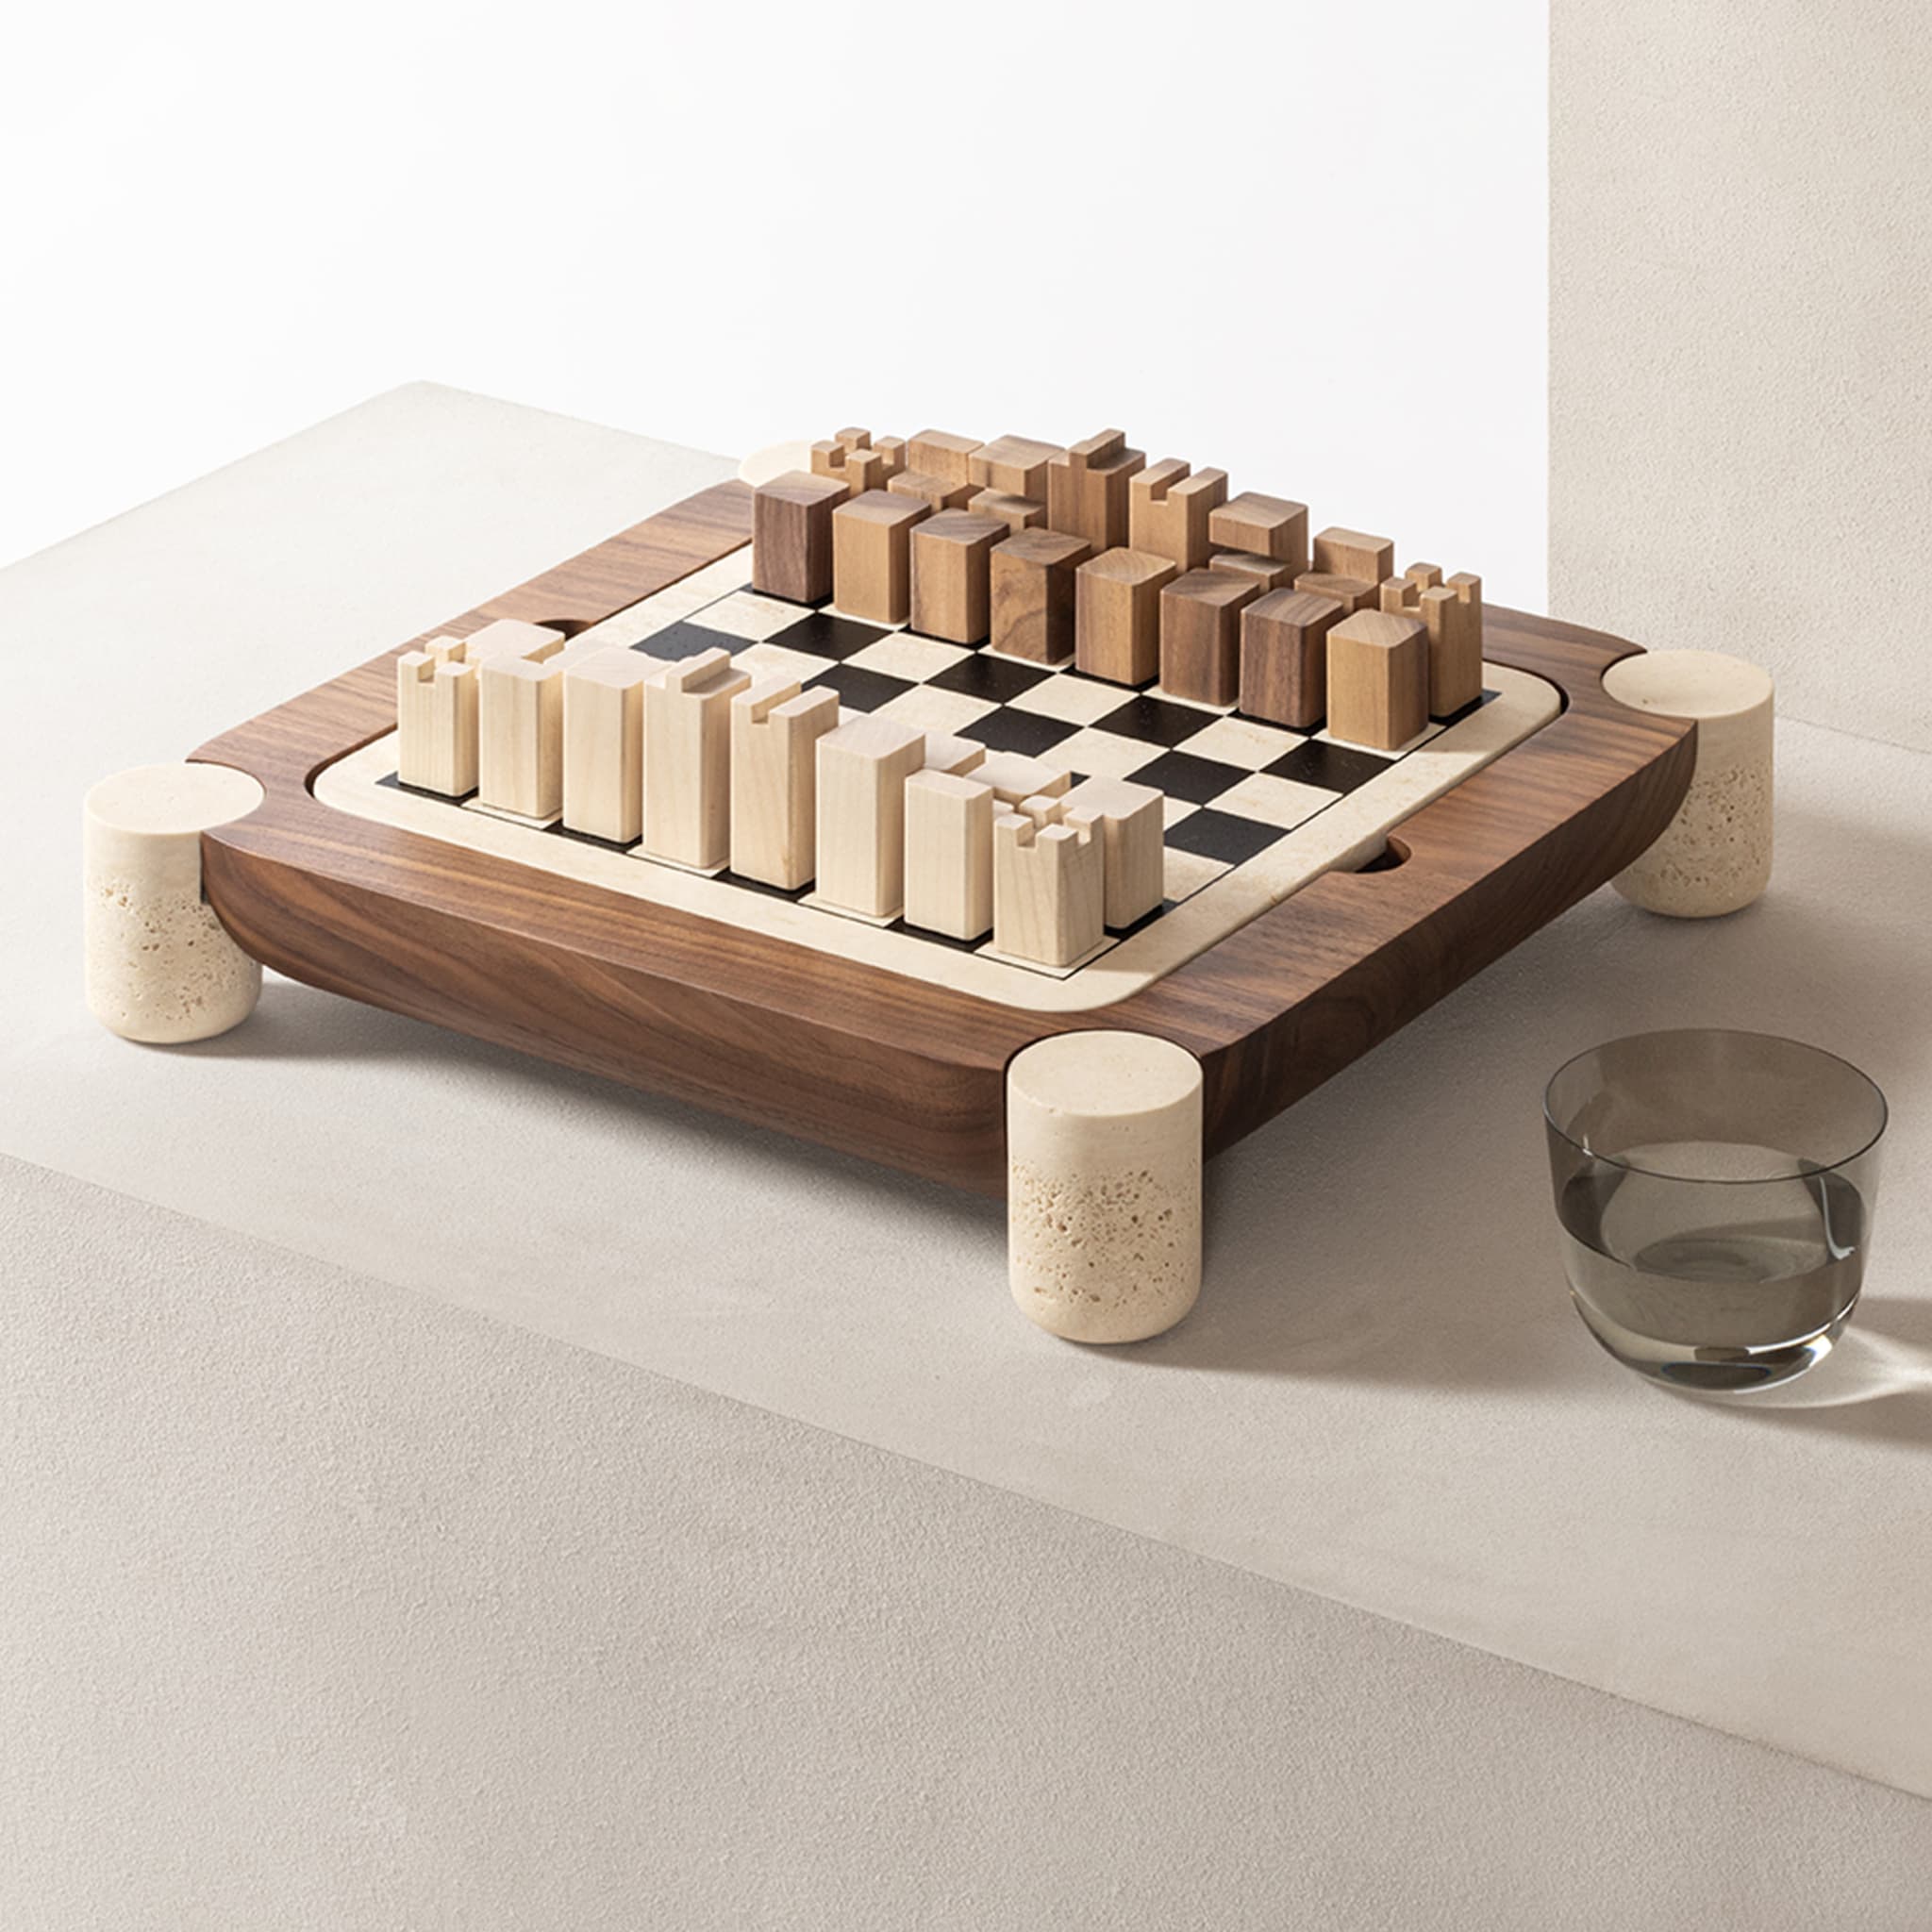 Mocambo Chess Draughts Game Set Design by Simone Fanciullacci - Alternative view 5